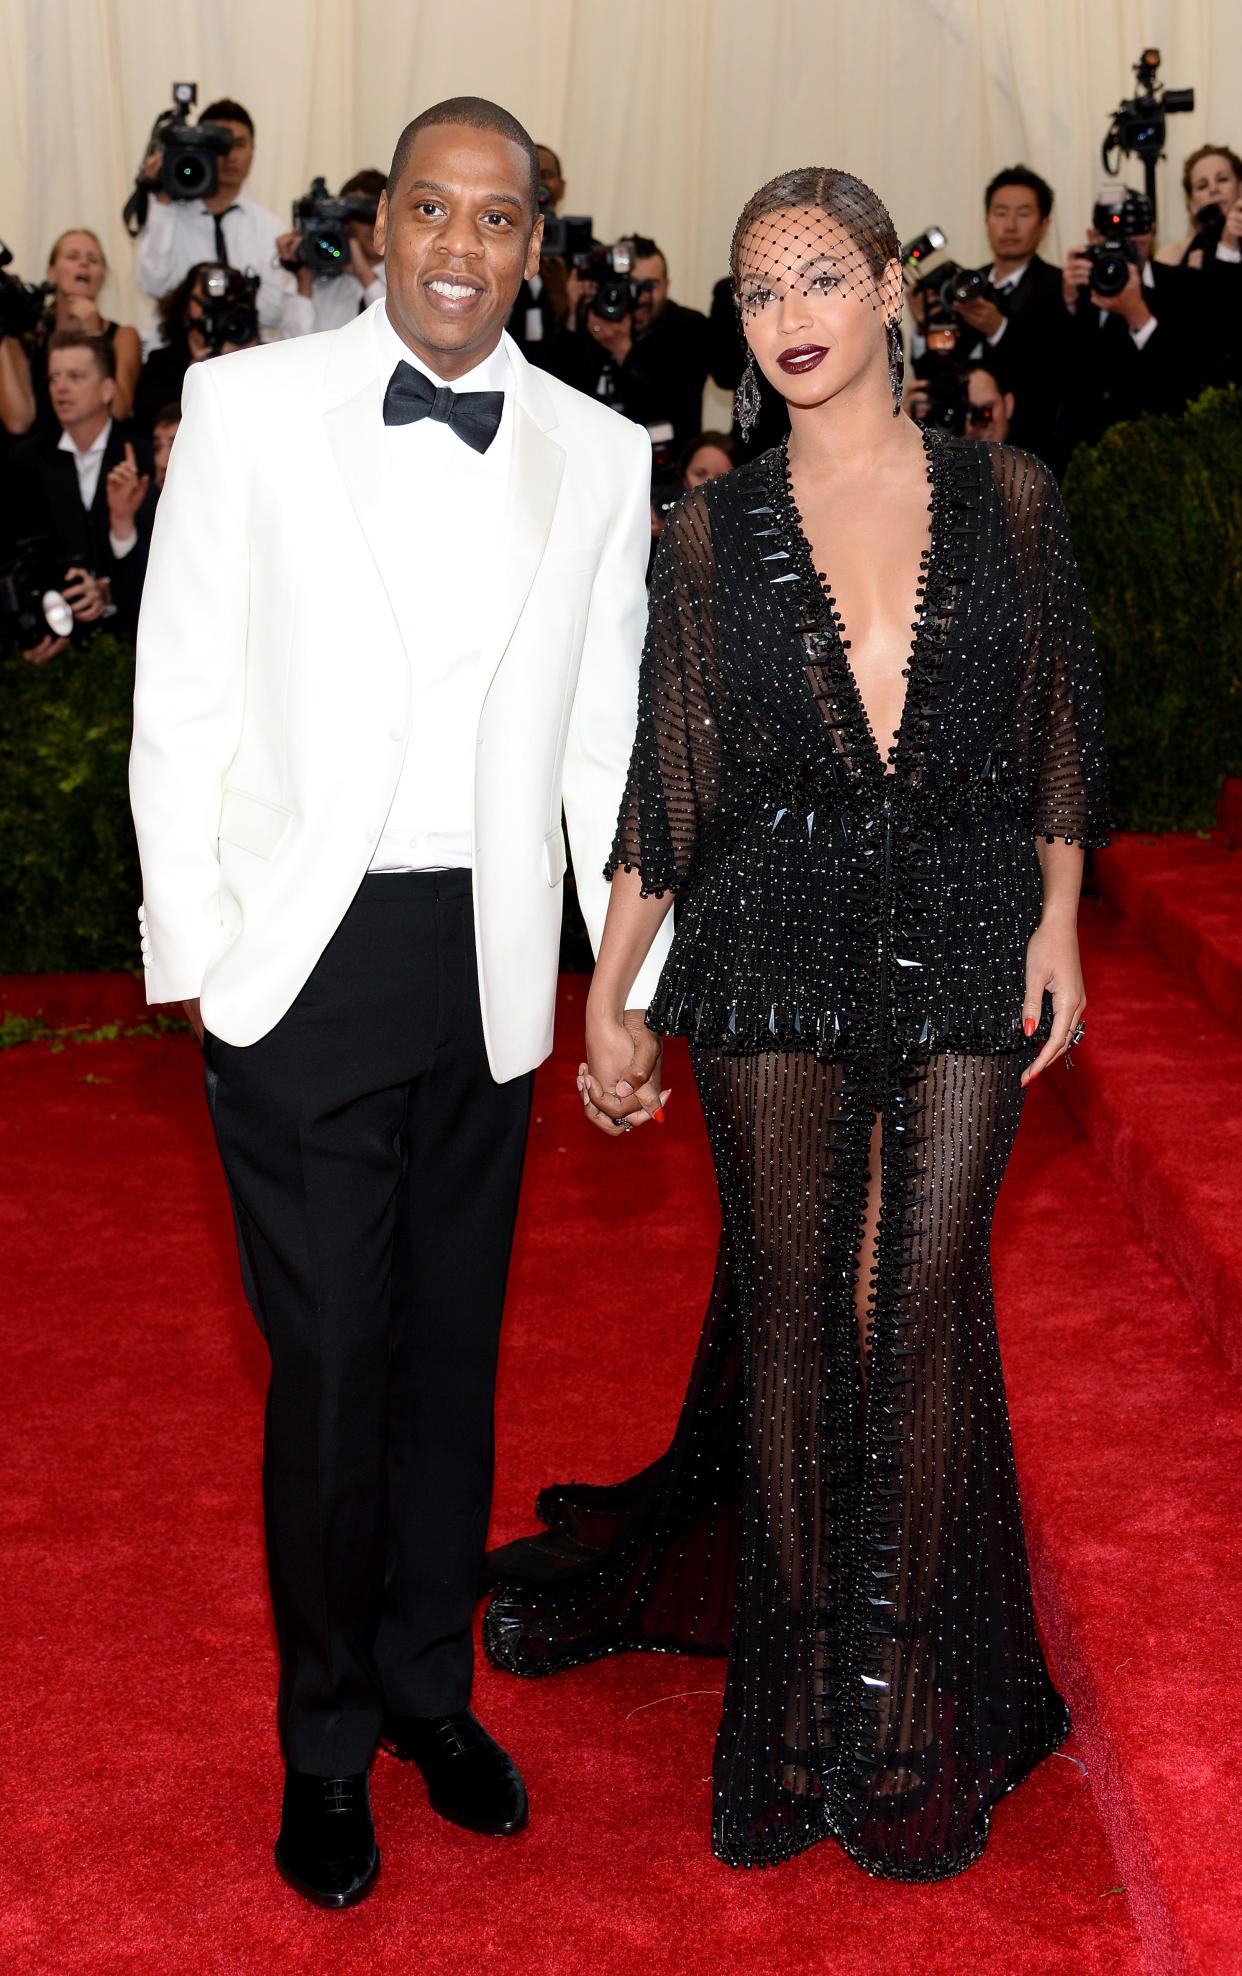 Jay-Z and Beyoncé attend the 2014 Met Gala.